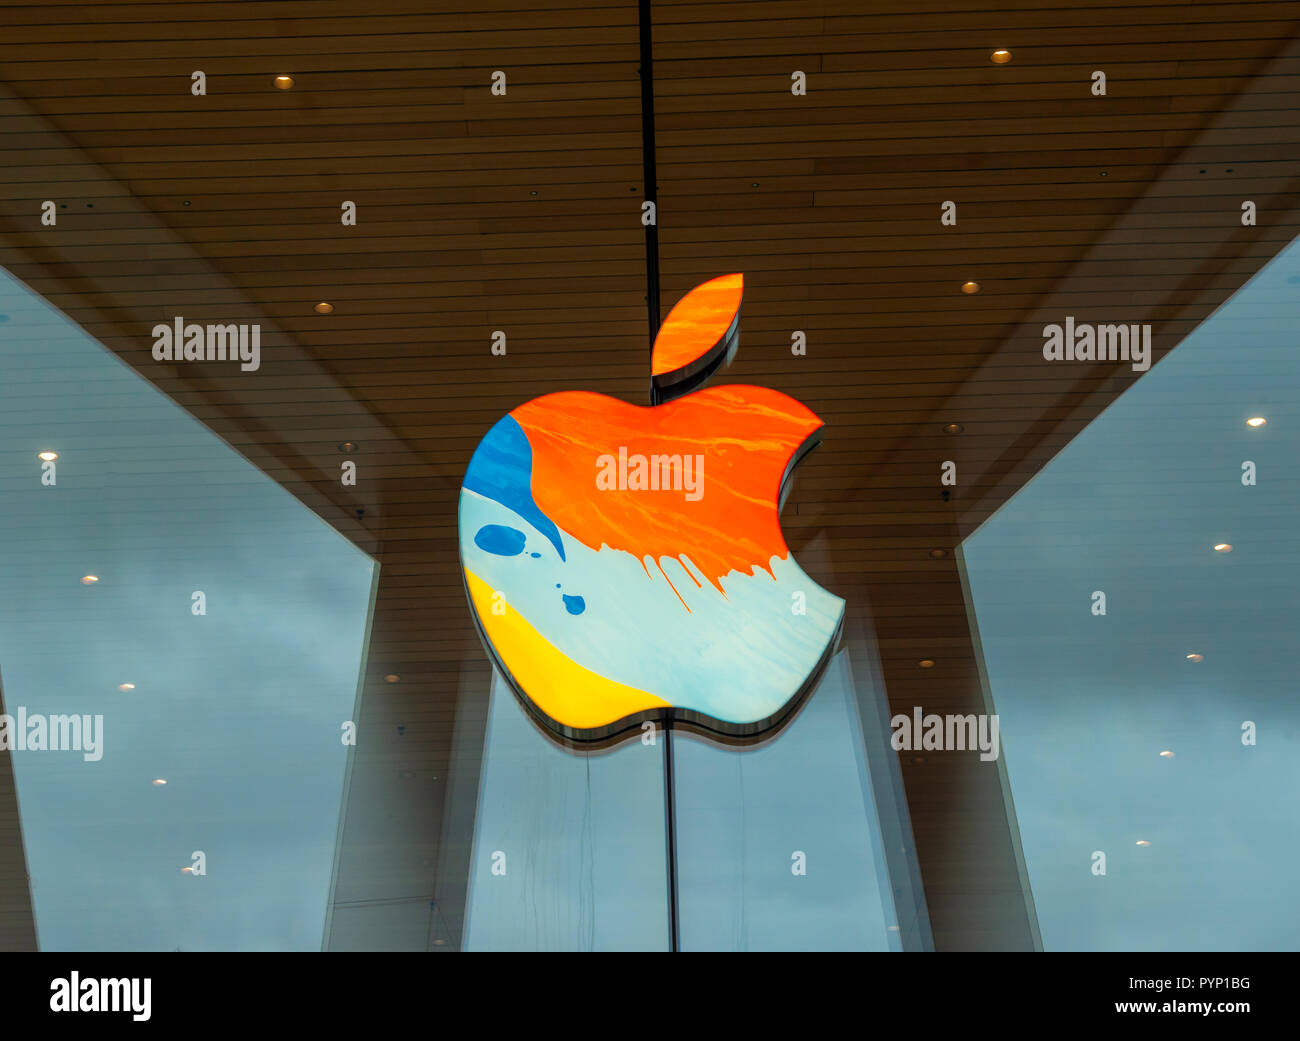 New York, USA. 29th October, 2018. The Downtown Brooklyn Apple store in New York is seen decorated on Monday, October 29, 2018 in advance of Tuesday's Apple product announcement taking place across the street in the Brooklyn Academy of Music. Apple is expected to release updated versions of the iPad and Mac computers. It also is scheduled to release third-quarter earnings after the bell on Thursday. Credit: Richard Levine/Alamy Live News Stock Photo